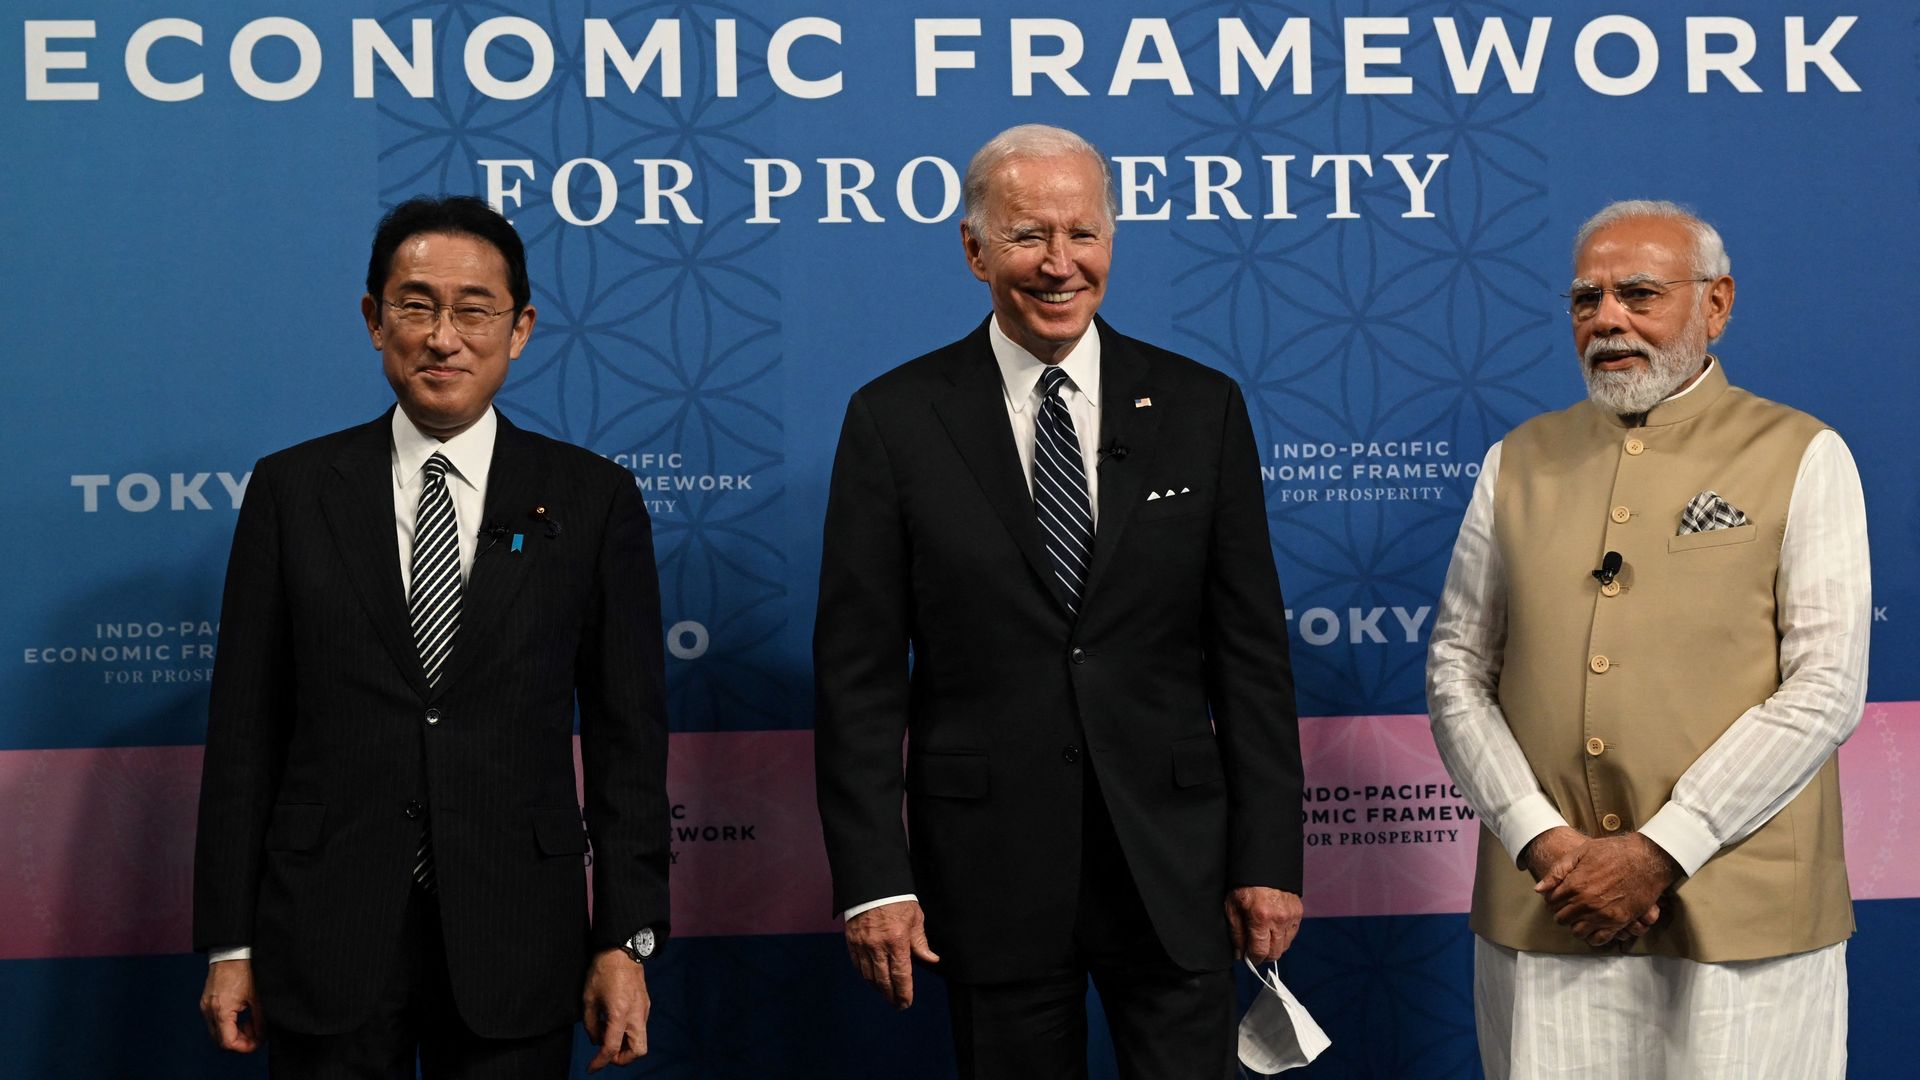 PM Narendra Modi attend the Indo-Pacific Economic Framework for Prosperity at the Izumi Garden Gallery in Tokyo on May 23.